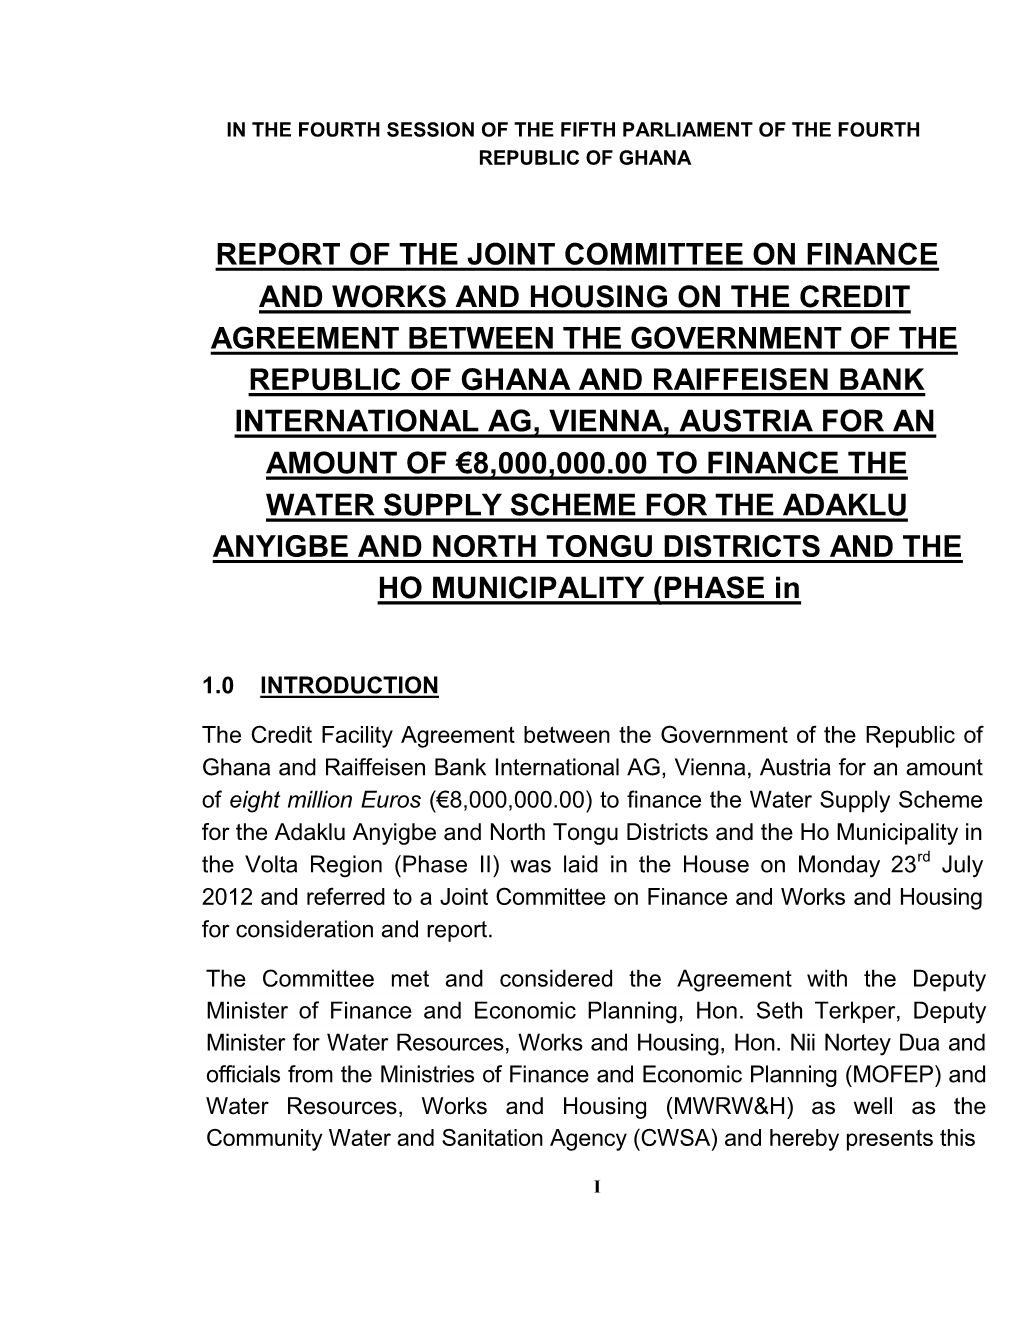 Report of the Joint Committee on Finance and Works and Housing on the Credit Agreement Between the Government of the Republic Of